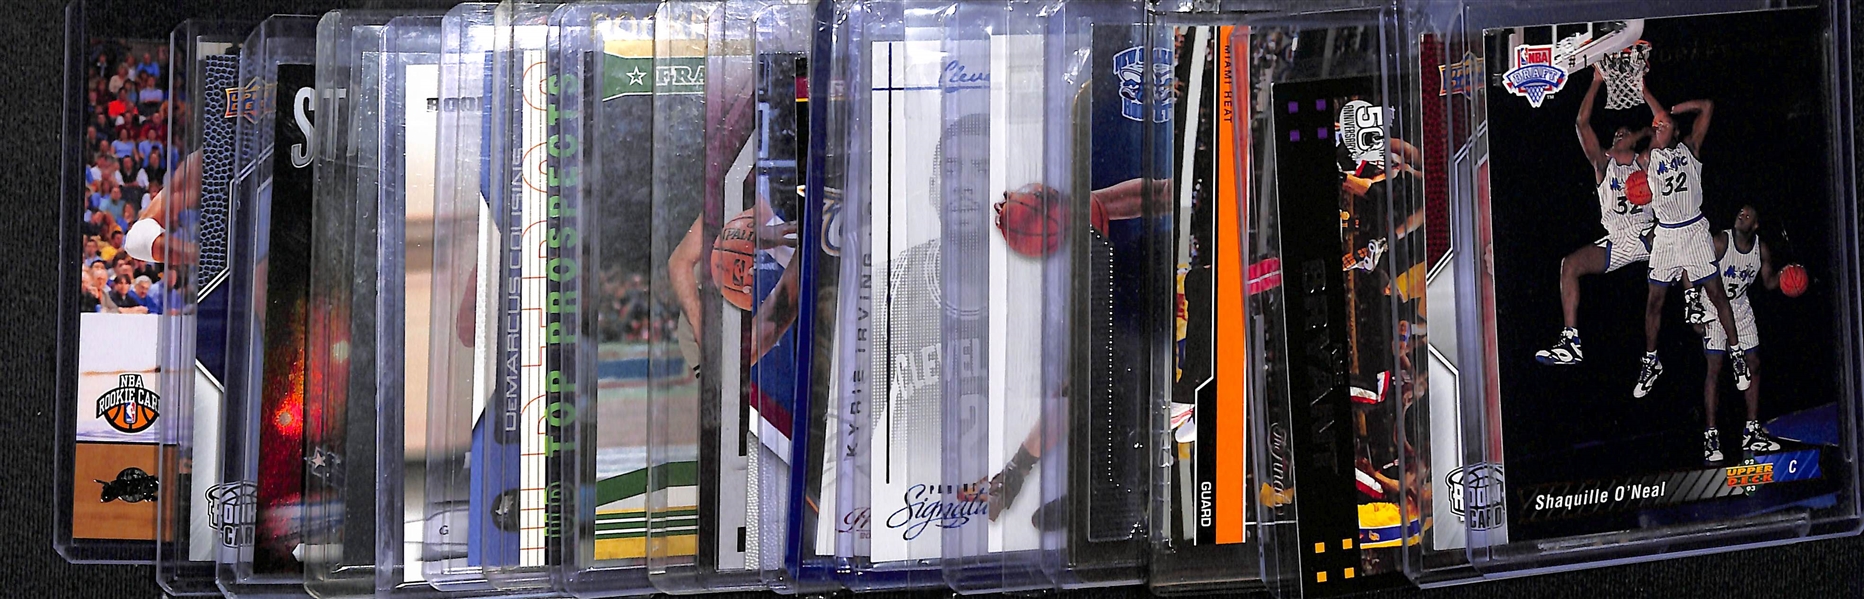 Lot of (21) NBA Rookies and Stars Basketball Card Lot w. Stephen Curry and Shaq Rookies, Kobe Bryant and Others